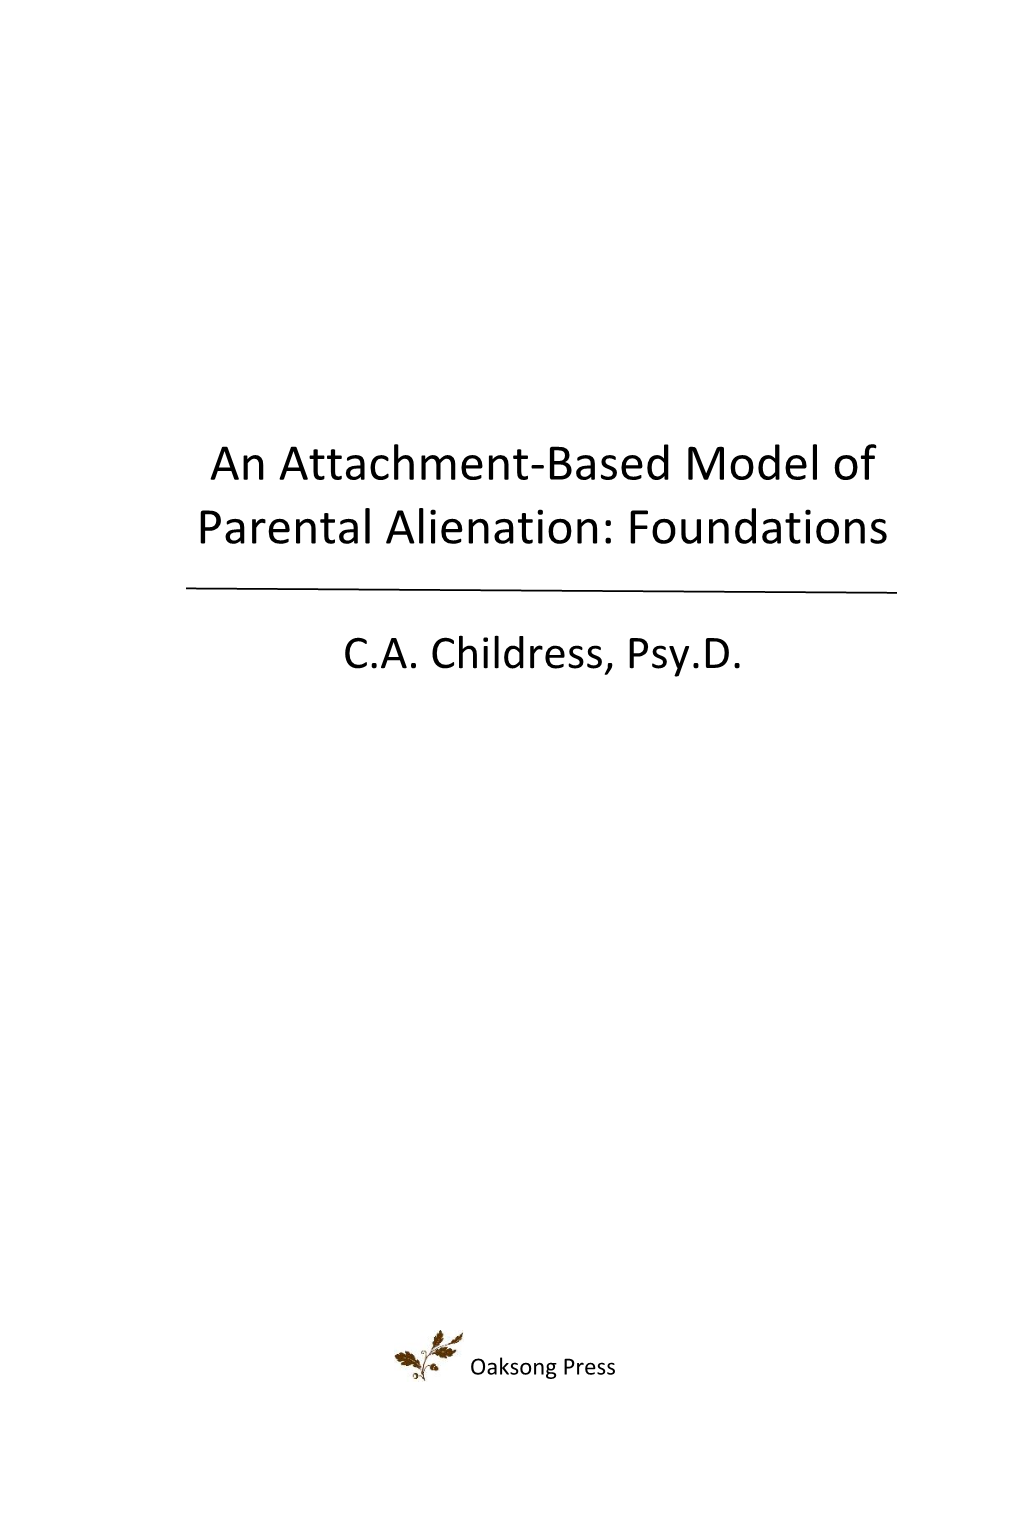 An Attachment-Based Model of Parental Alienation: Foundations